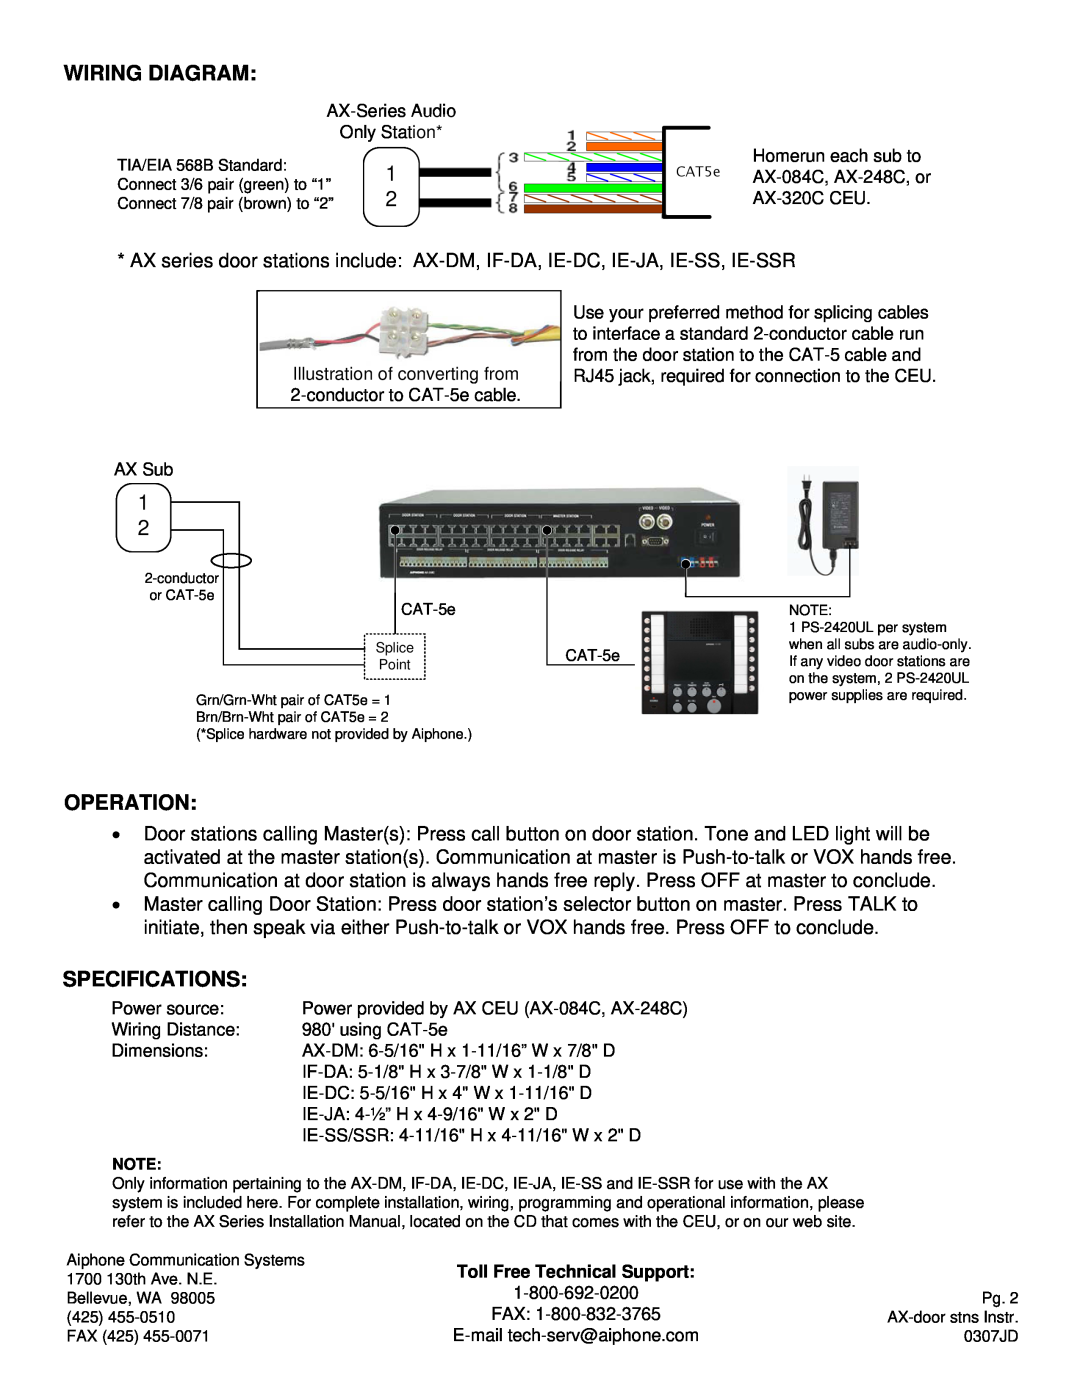 Aiphone IF-DA, AX-DM, IE-SS(R), IE-JA manual Wiring Diagram, Operation, Specifications 